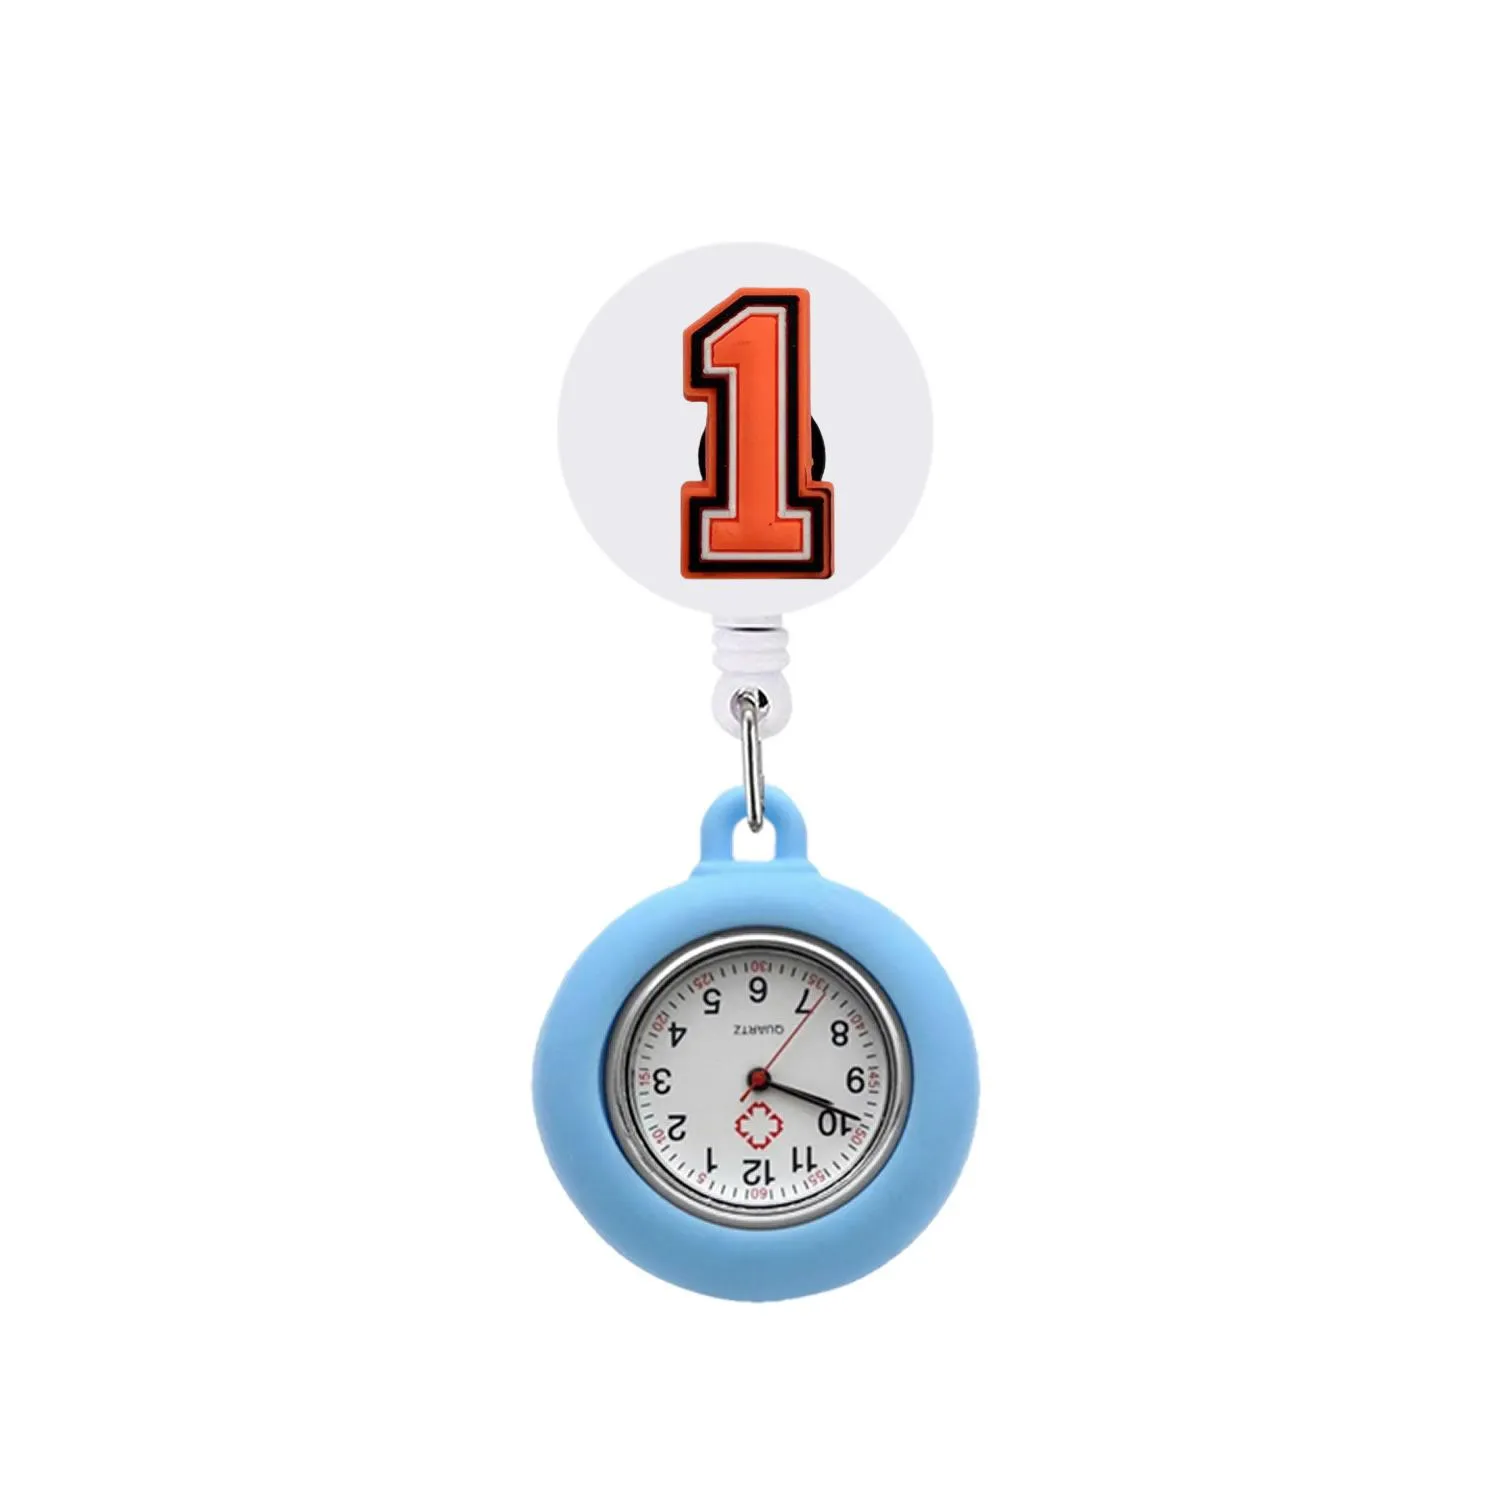 orange number 11 clip pocket watches pattern design nurse watch badge accessories brooch pin-on pin on with secondhand stethoscope lapel fob